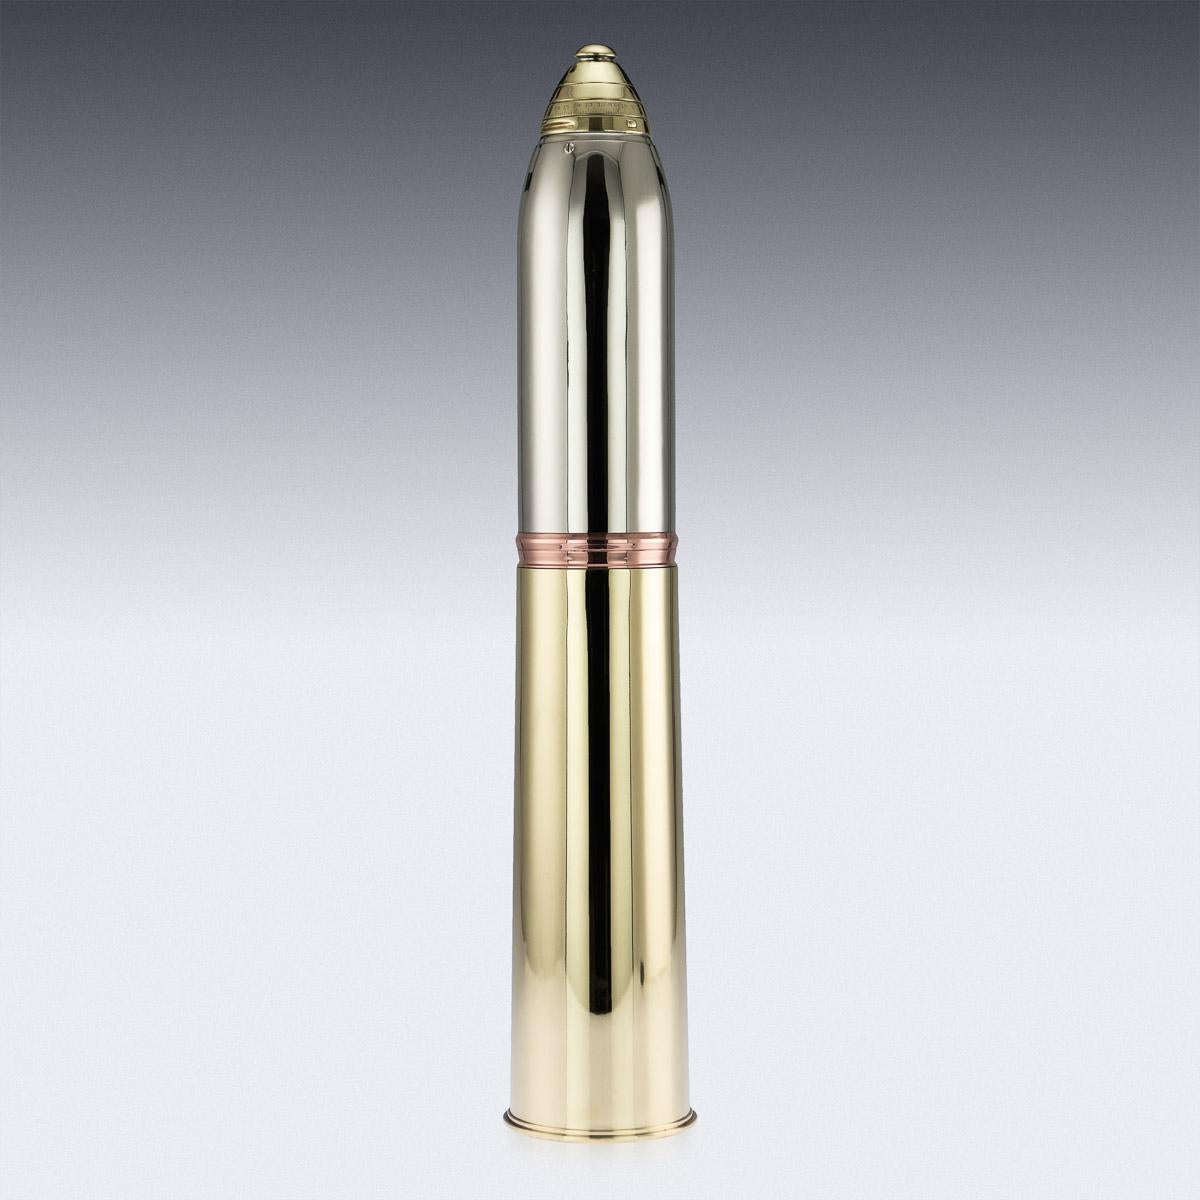 Antique early-20th century American Gorham silver plated, copper and brass novelty artillery shell cocktail Shaker, huge size, modelled as a very detailed fac-simile of the WWI Eighteen-Pounder Shrapnel Shell, in three sections, the top opens to